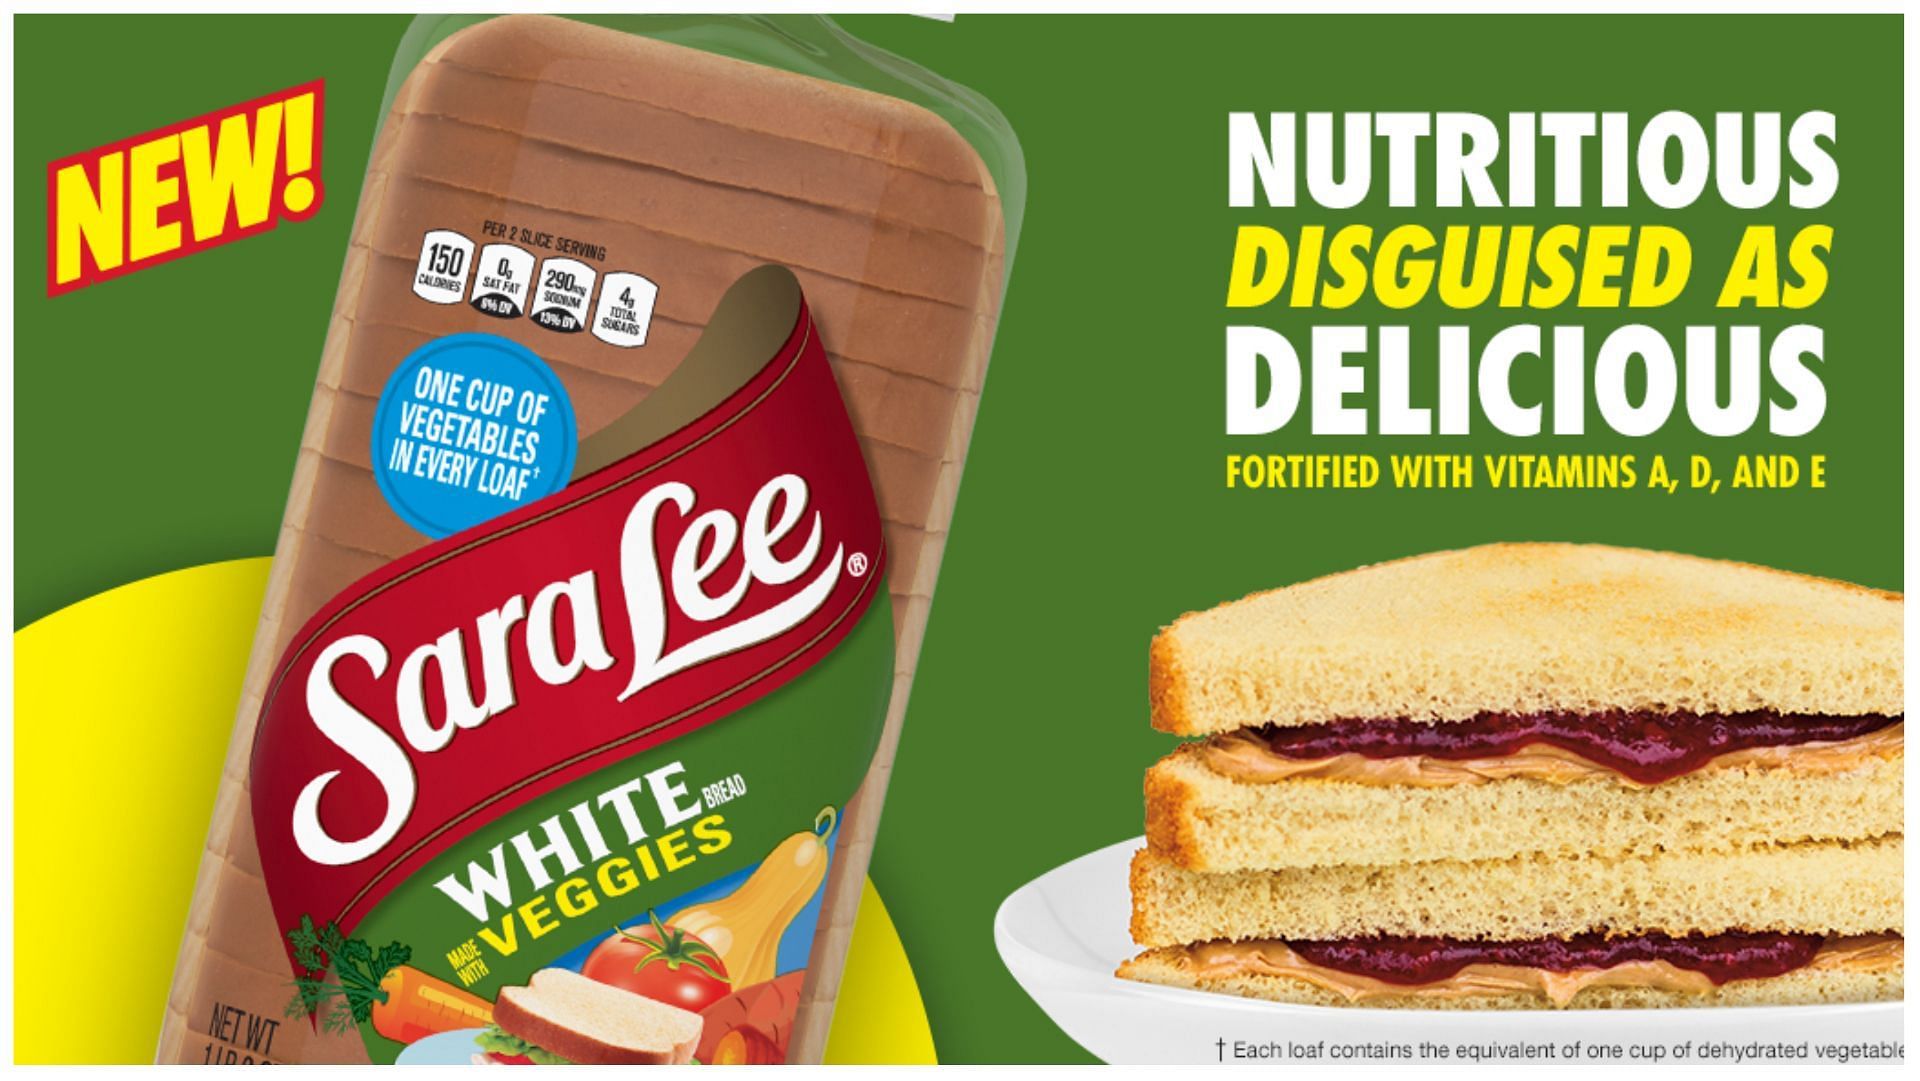 All you need to know about Sara Lee's new White Bread with Veggies